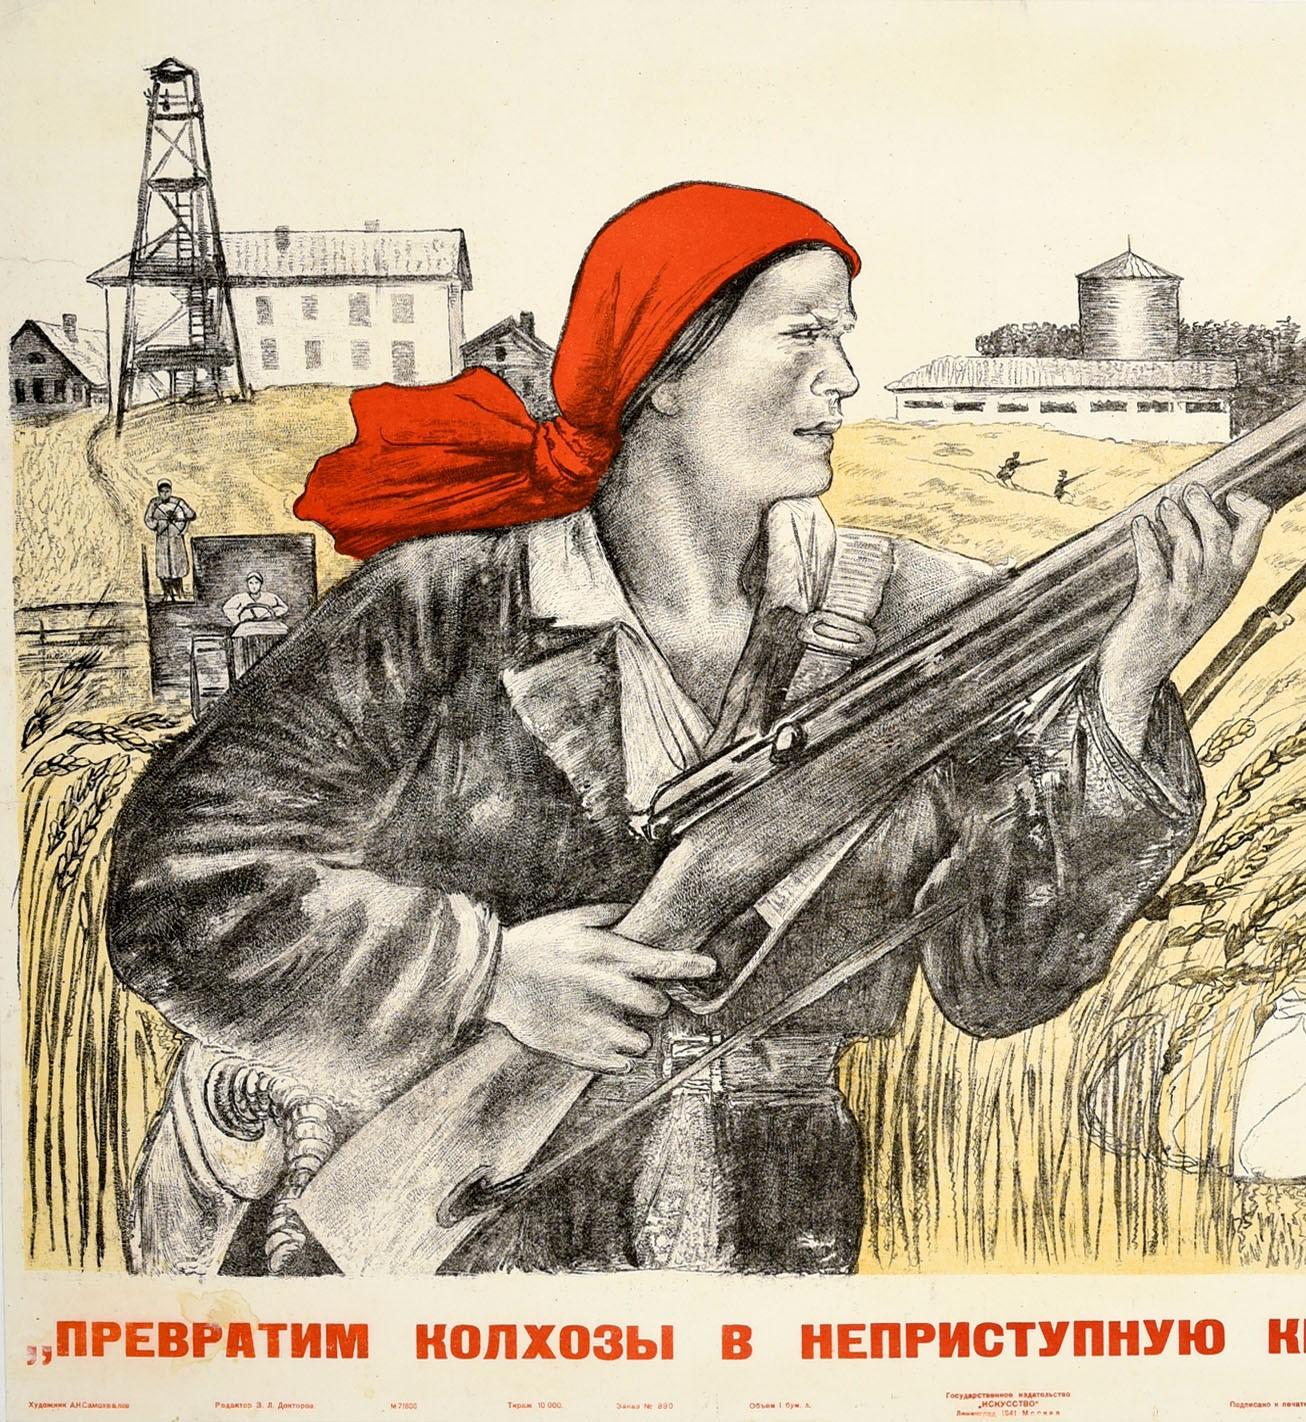 Original vintage Soviet World War Two propaganda poster - Turn Collective Farms into an Impregnable Fortress for the Enemy - featuring great artwork in black and white shades depicting a lady wearing a red headscarf and holding a rifle gun in a pale